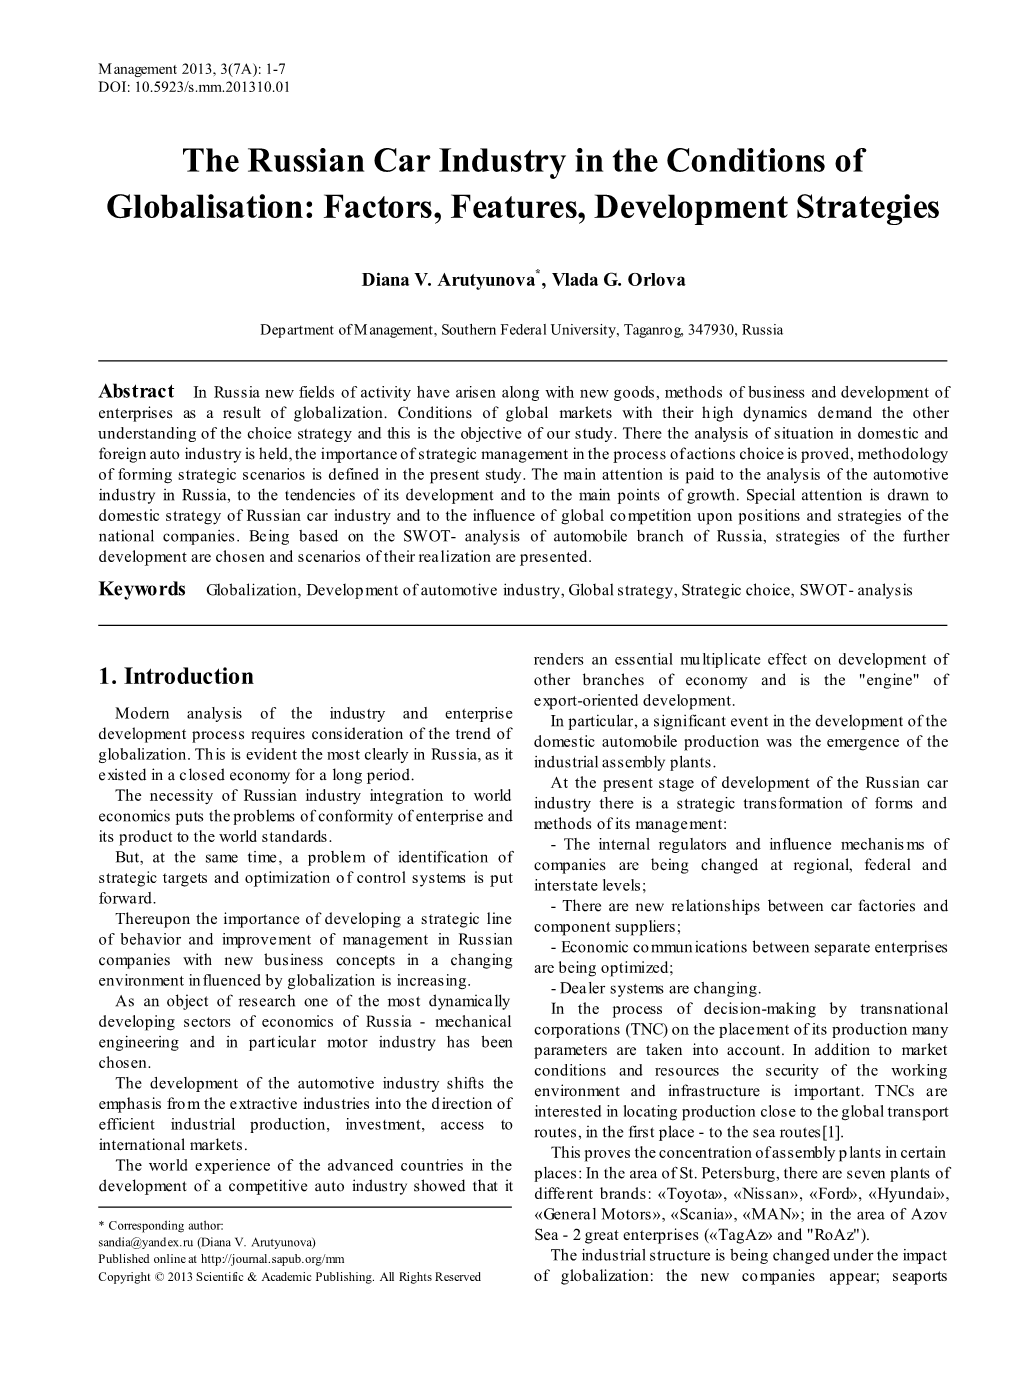 The Russian Car Industry in the Conditions of Globalisation: Factors, Features, Development Strategies